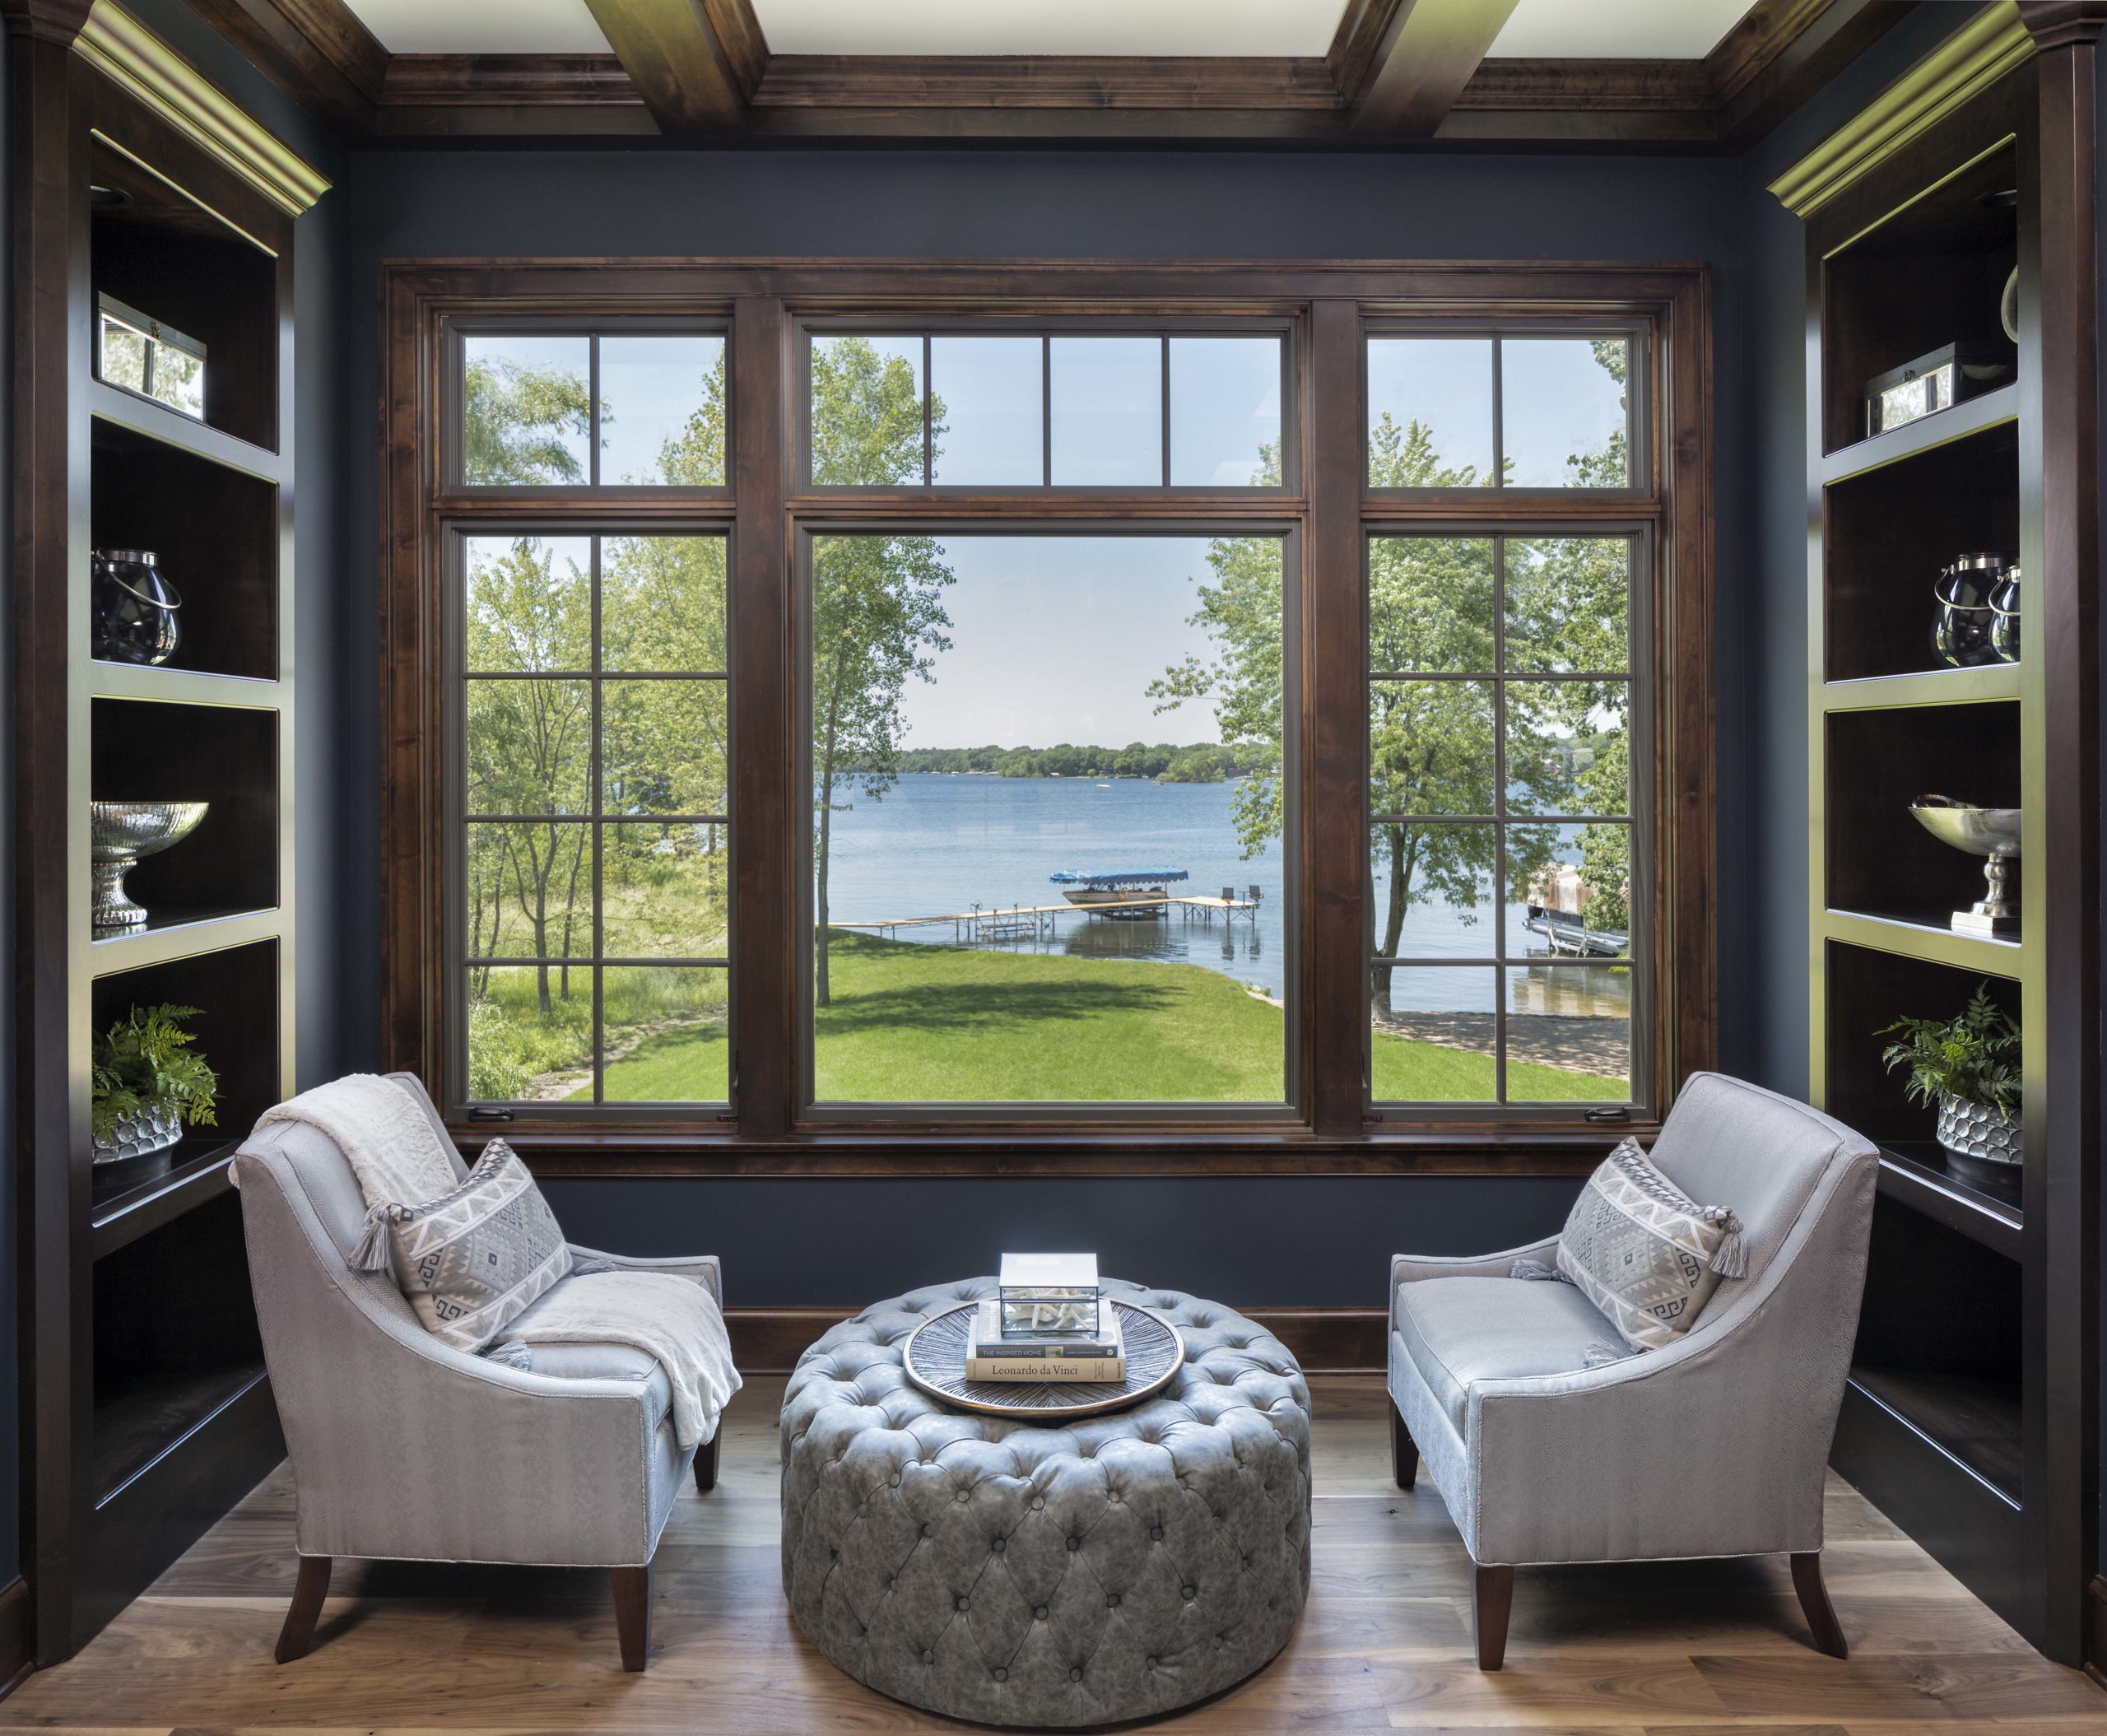 A living room on Grimes Avenue with a large window overlooking a lake.